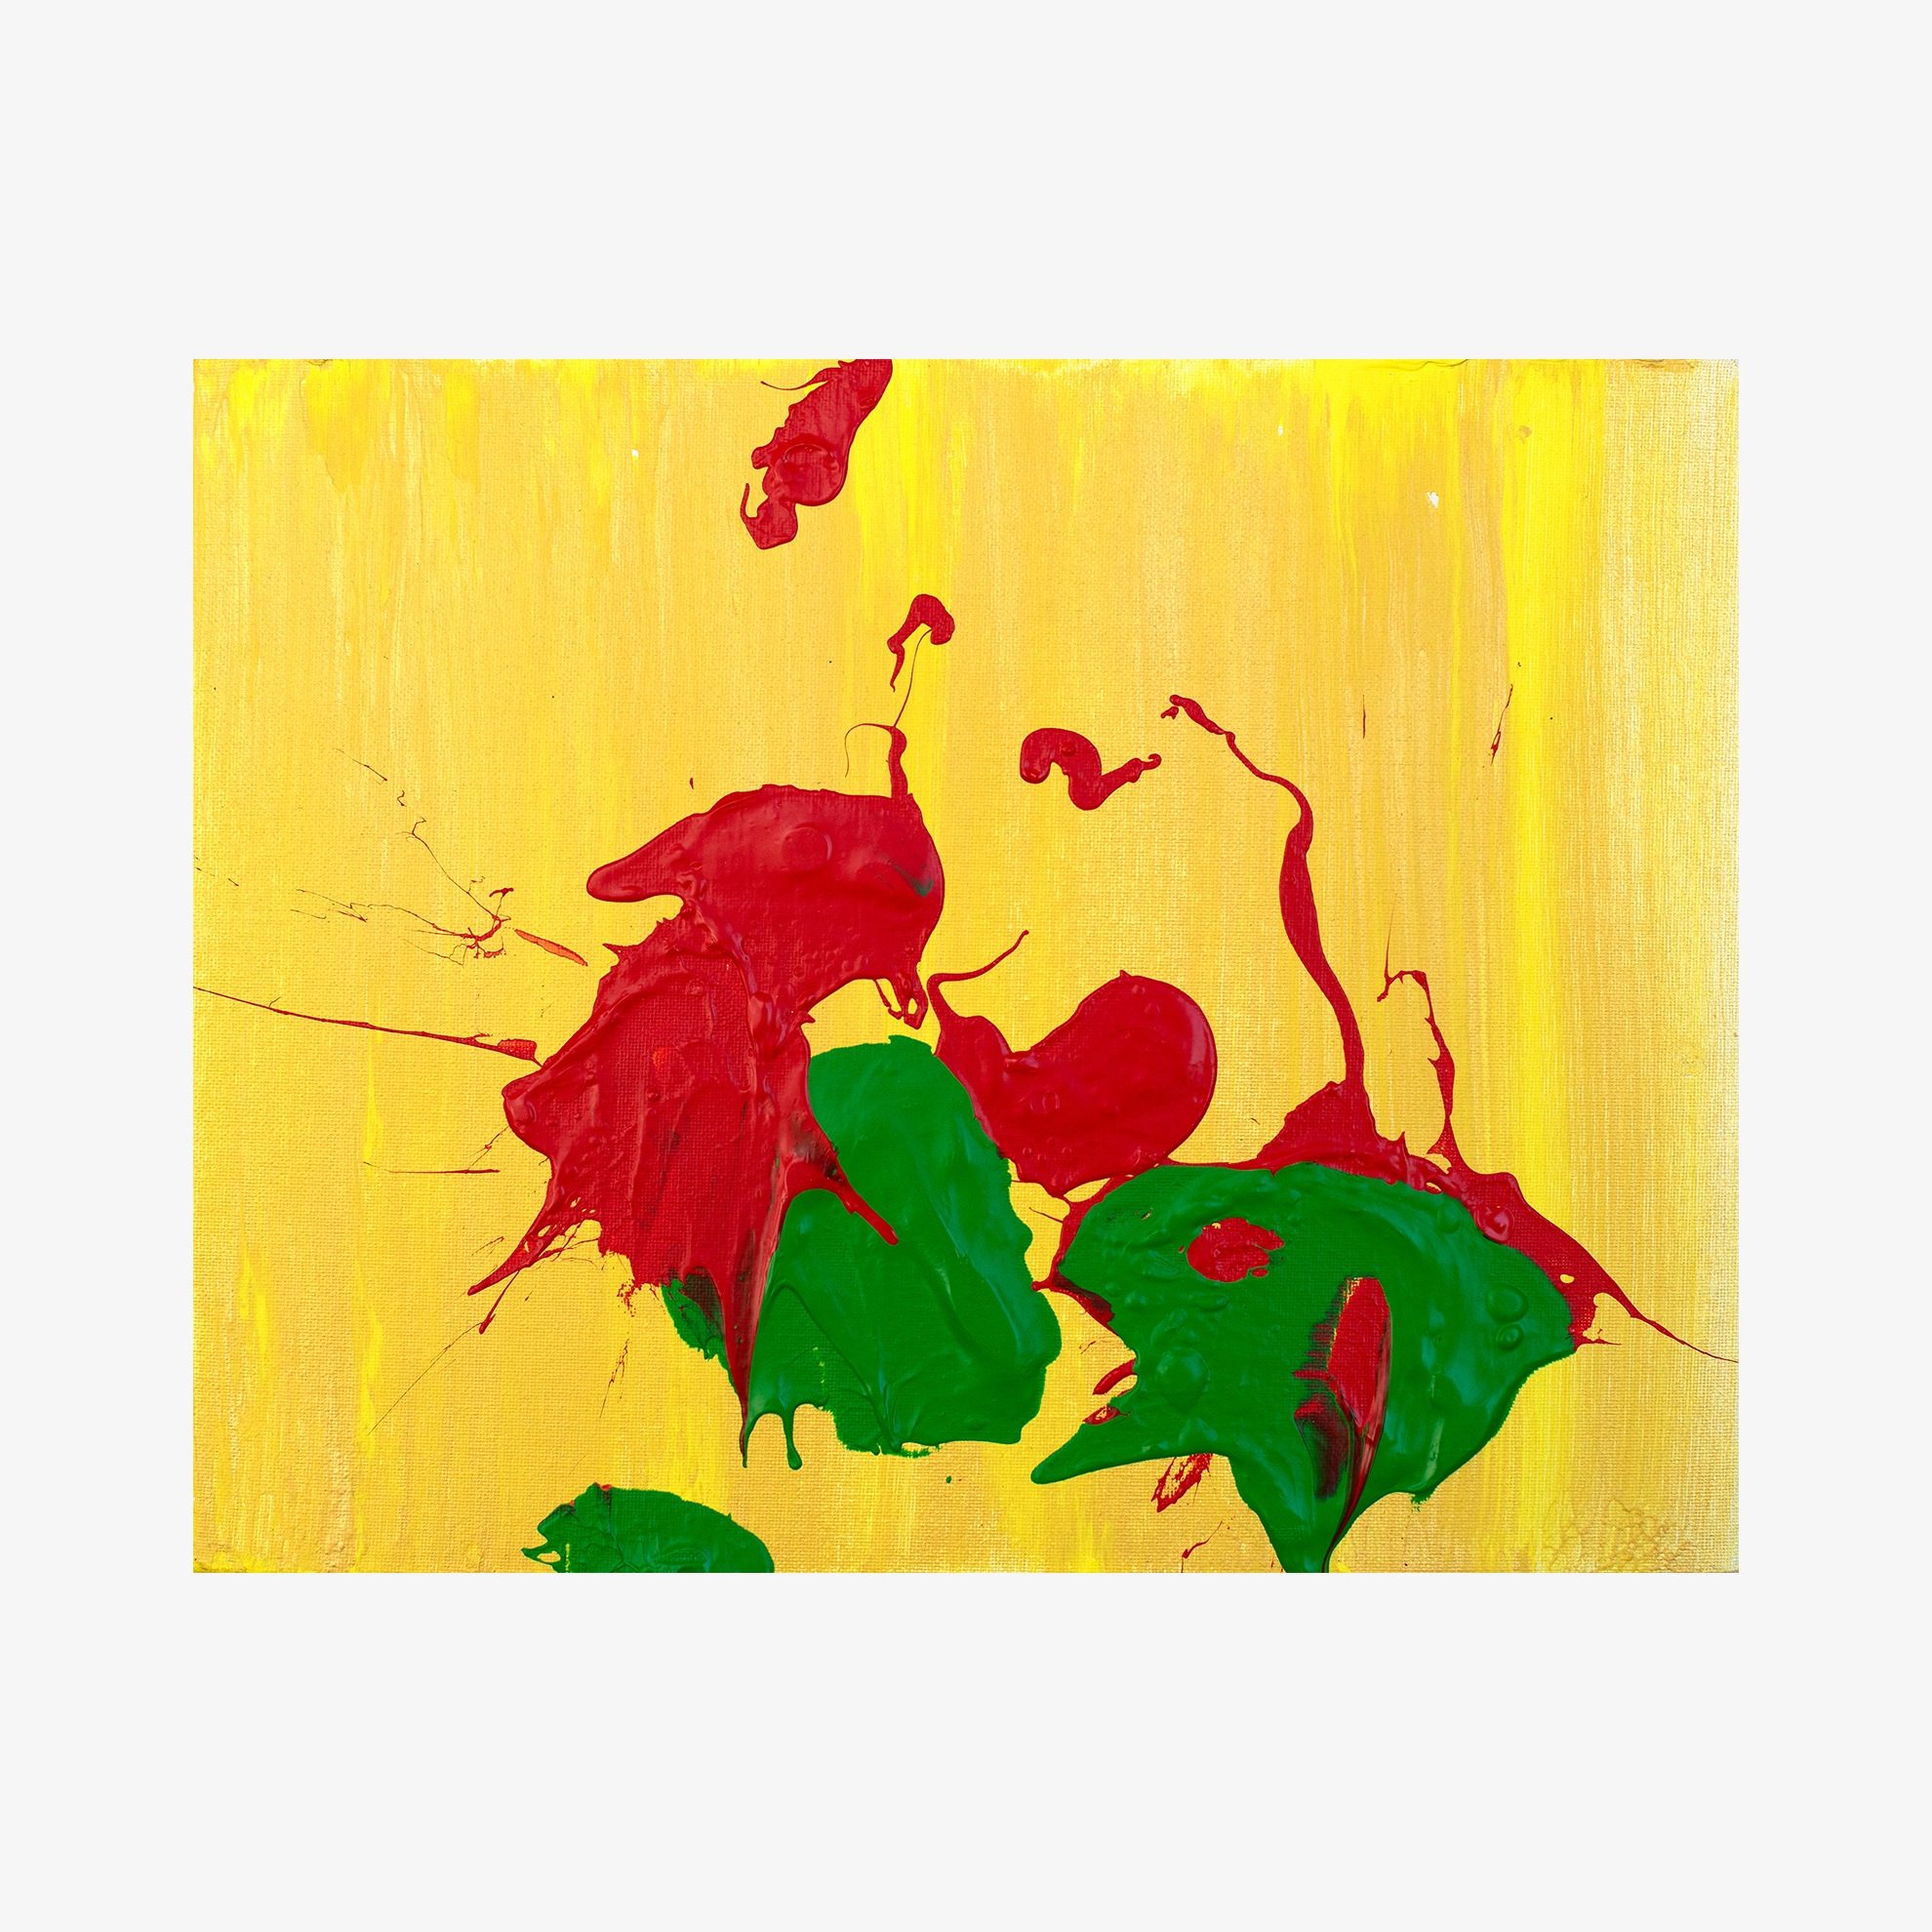 Abstract painting by artist Anthony Zaccaria titled "2021 A Better Year" with red and green splatter paint design on a bright yellow background.